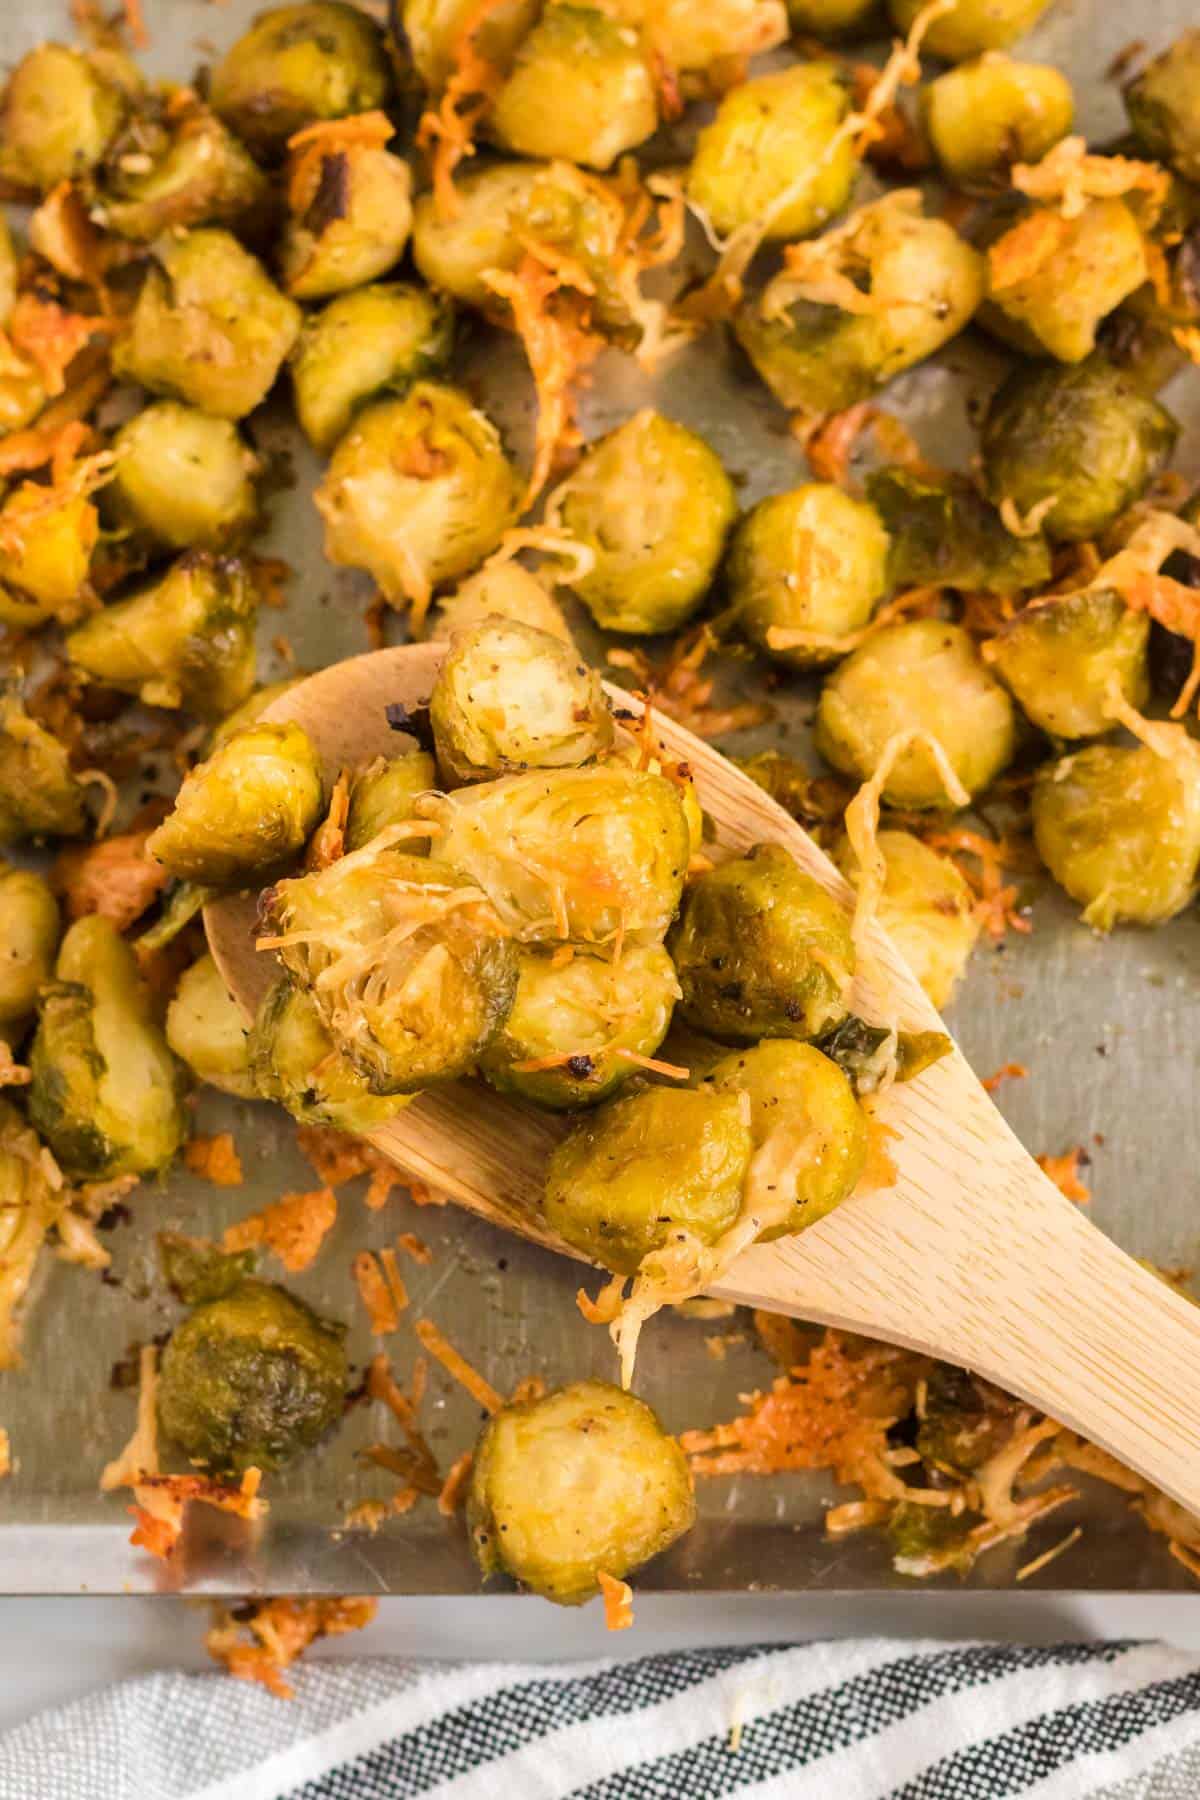 wooden spoon taking a serving of roasted brussels sprouts from the baking sheet